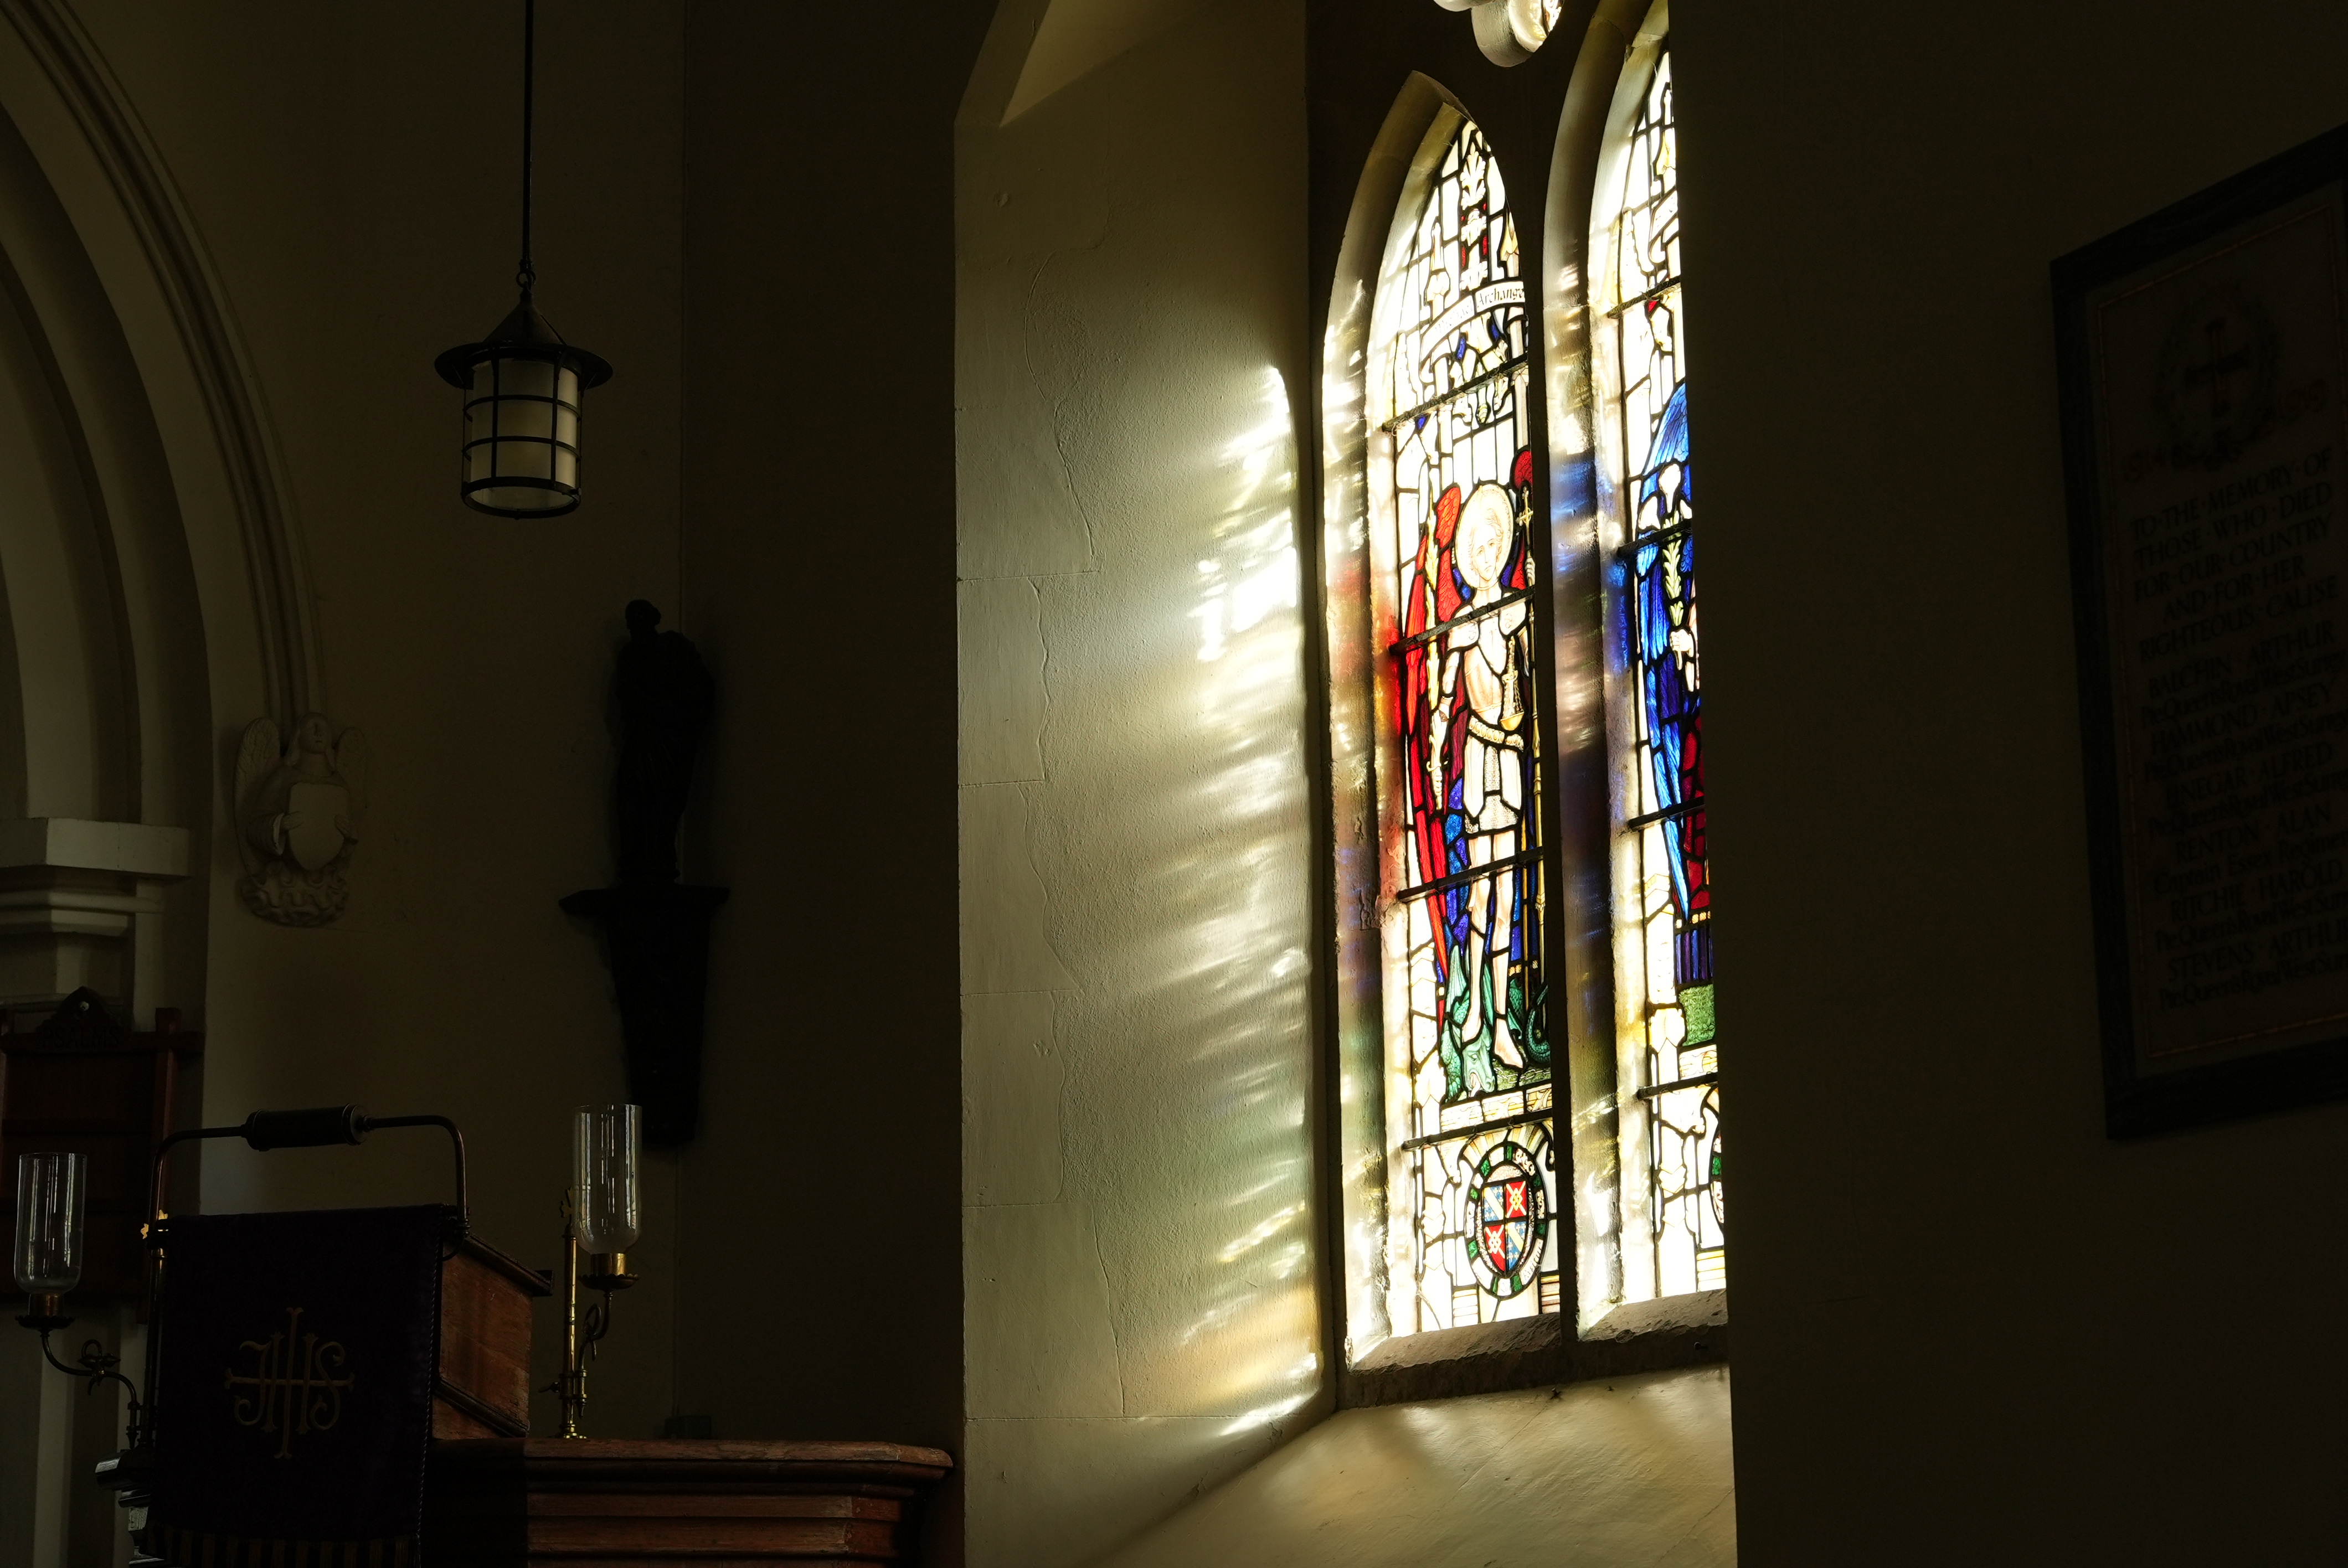 A stained glass window with light coming through it